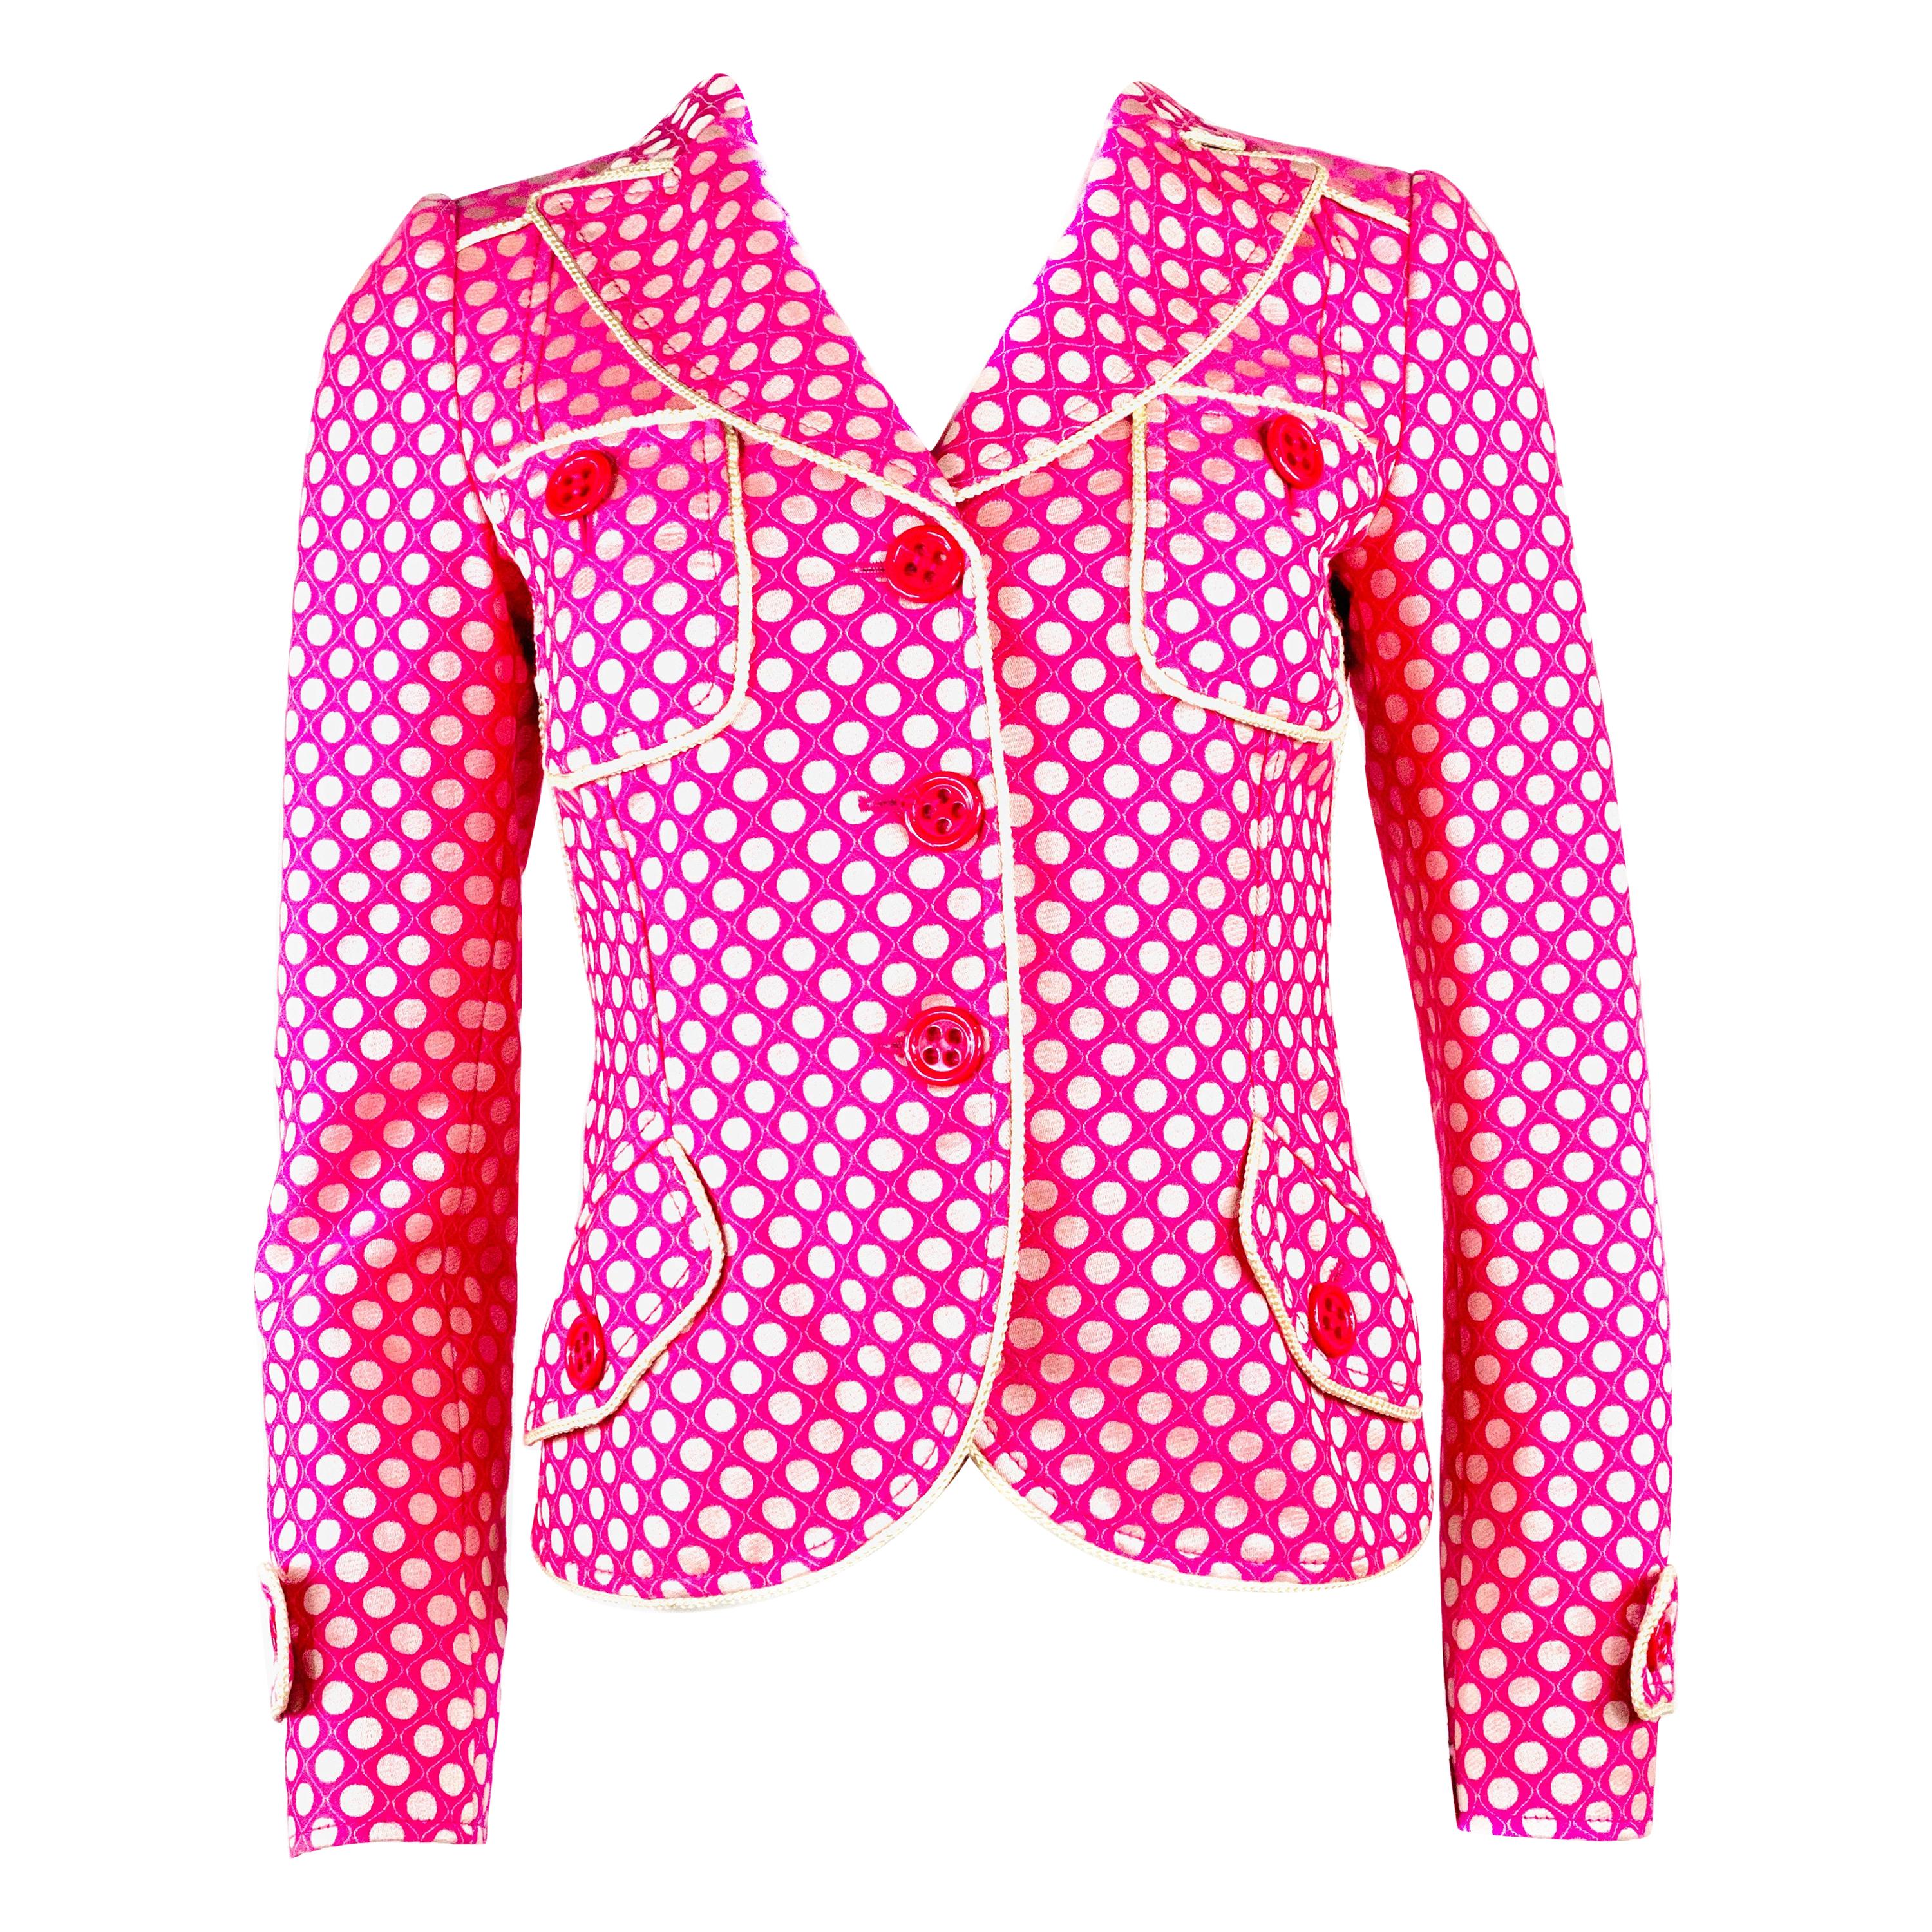 MOSCHINO Cheap and Chic Pink Polka Dot Blazer Jacket w/ Buttons Size 8 For Sale